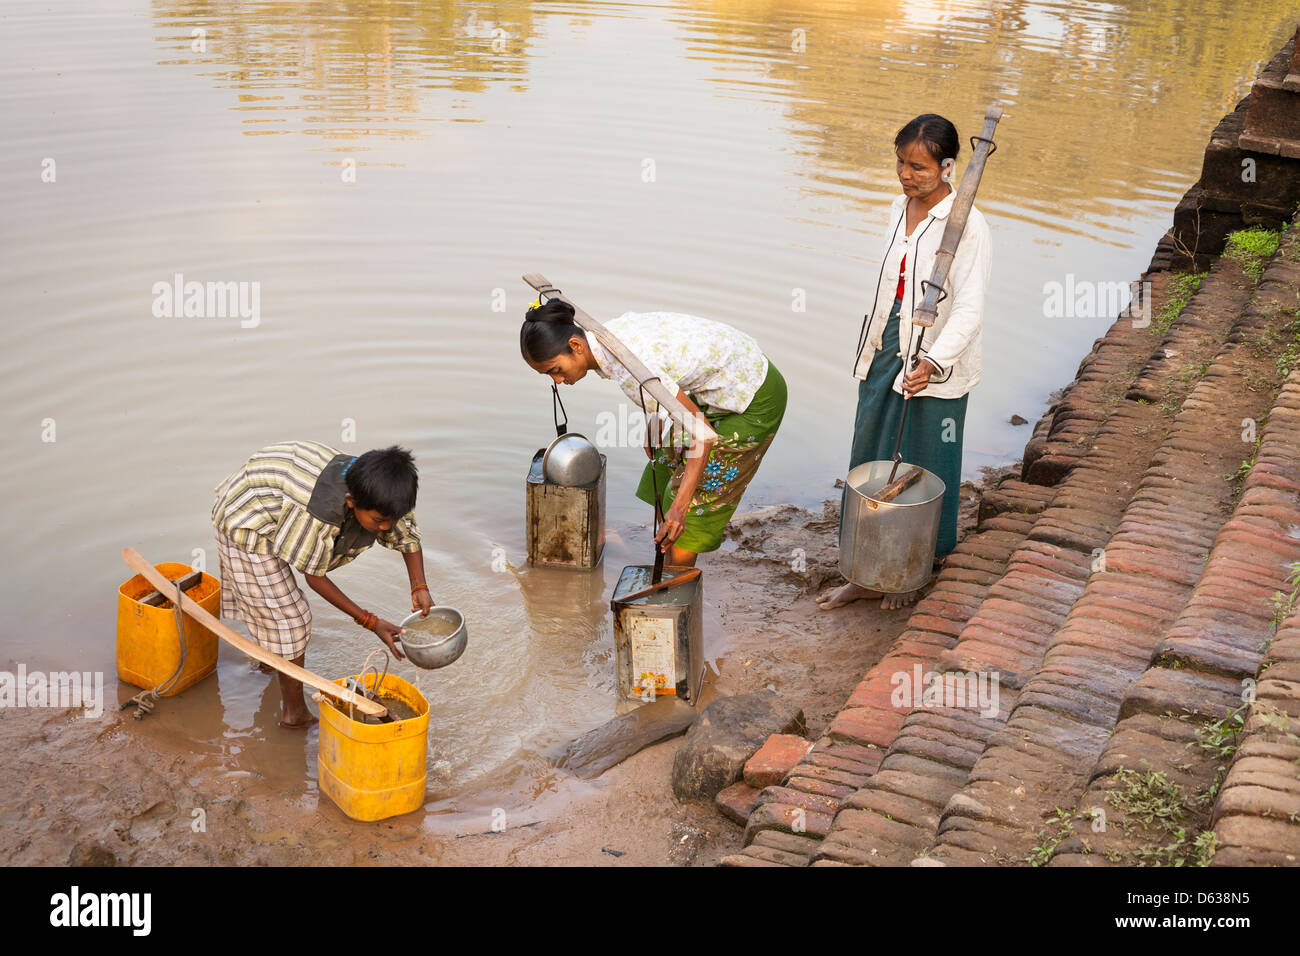 Villagers filling water containers with water, Minnanthu, Bagan, Myanmar, (Burma) Stock Photo